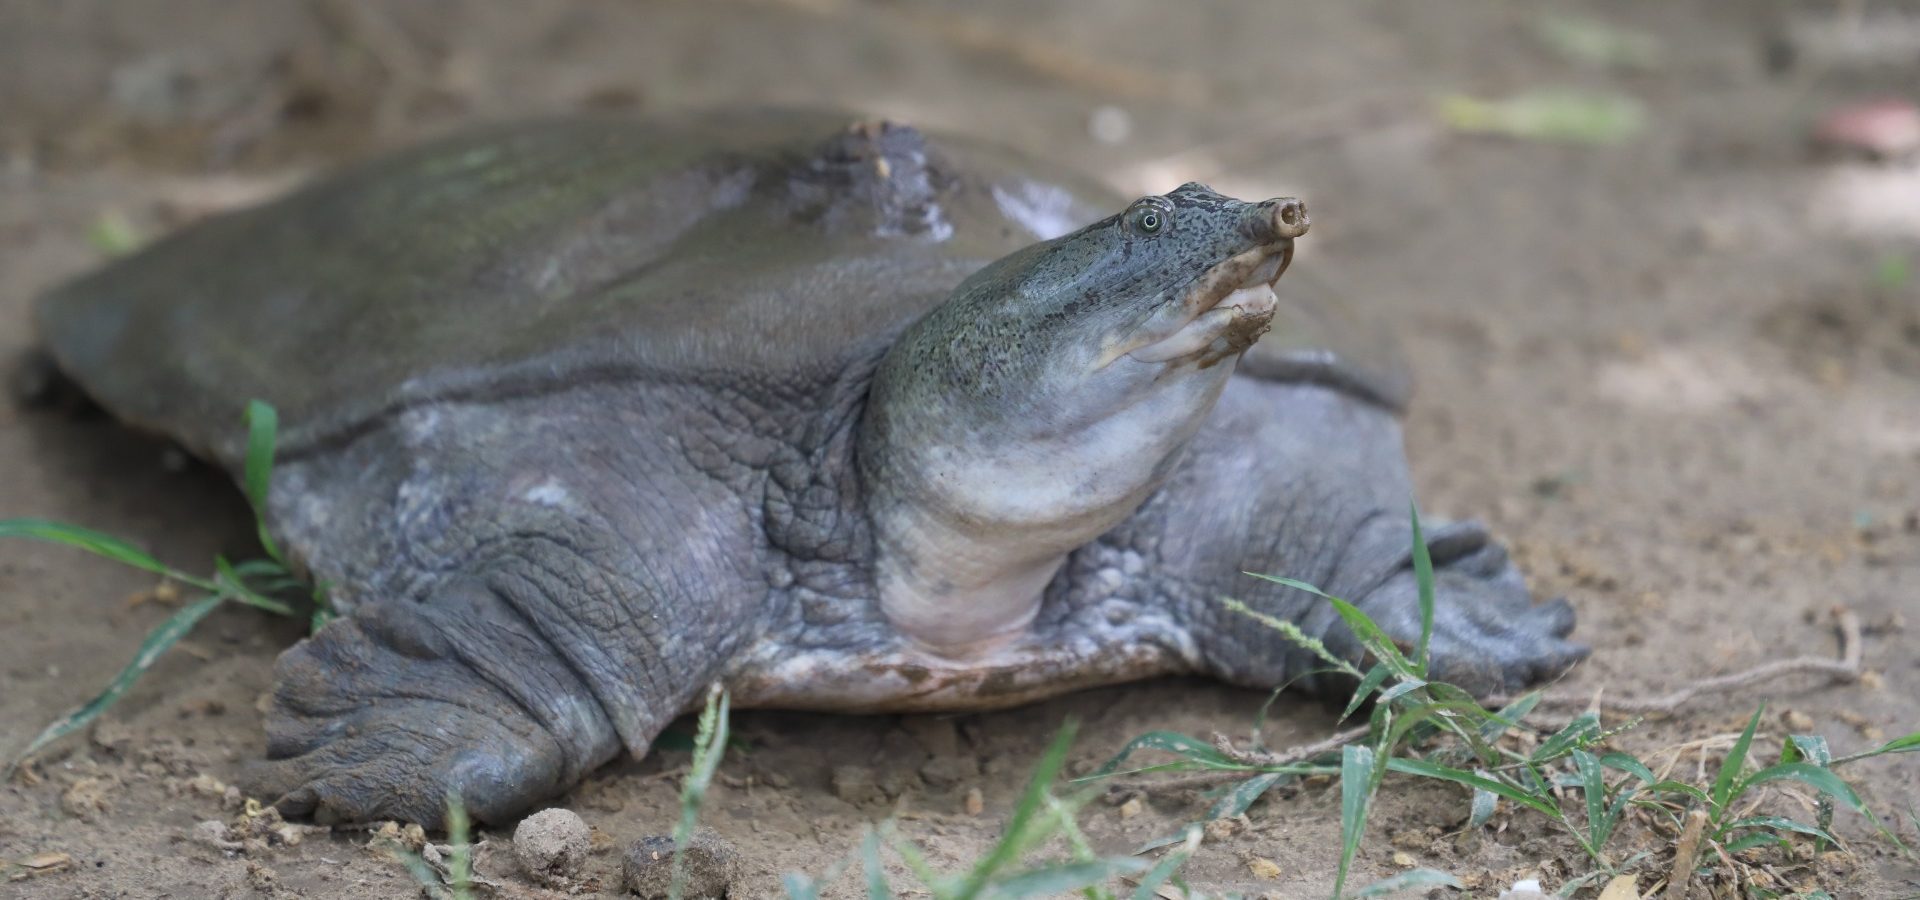 Introducing The Indian Softshell Turtle - Wildlife SOS